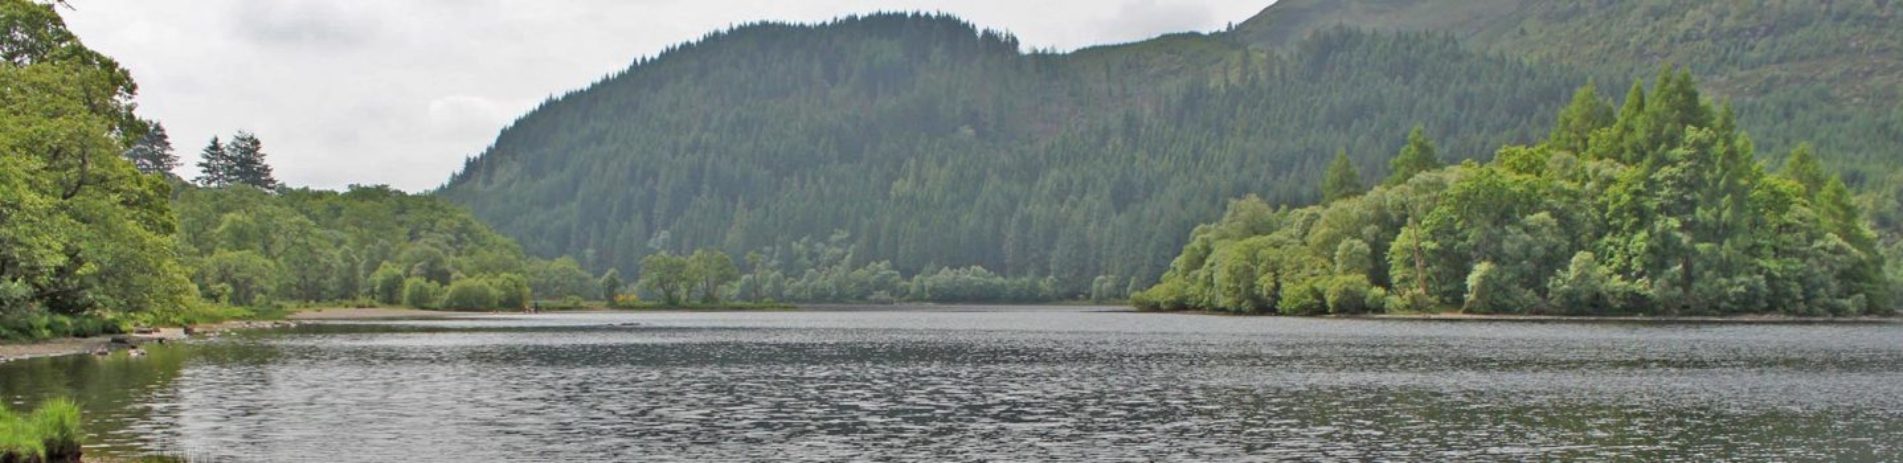 loch-chon-with-wooded-shores-and-island-prominent-seen-from-the-campsite-beach